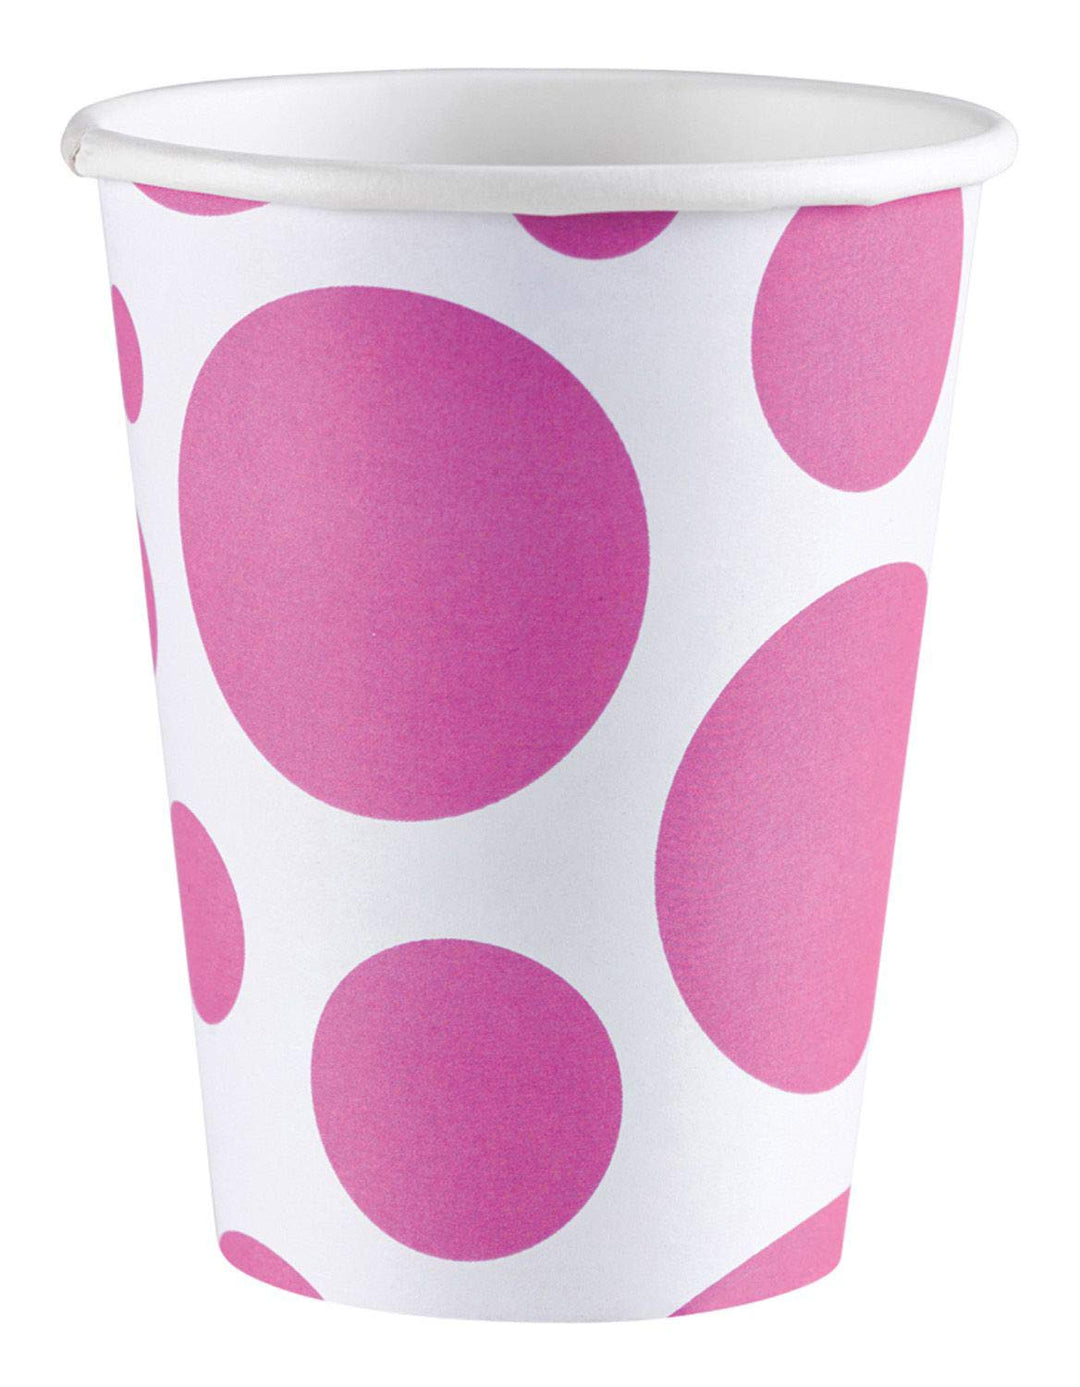 Amscan: Solid Colour Dots Pink - 8 Bicchieri 200 Ml;